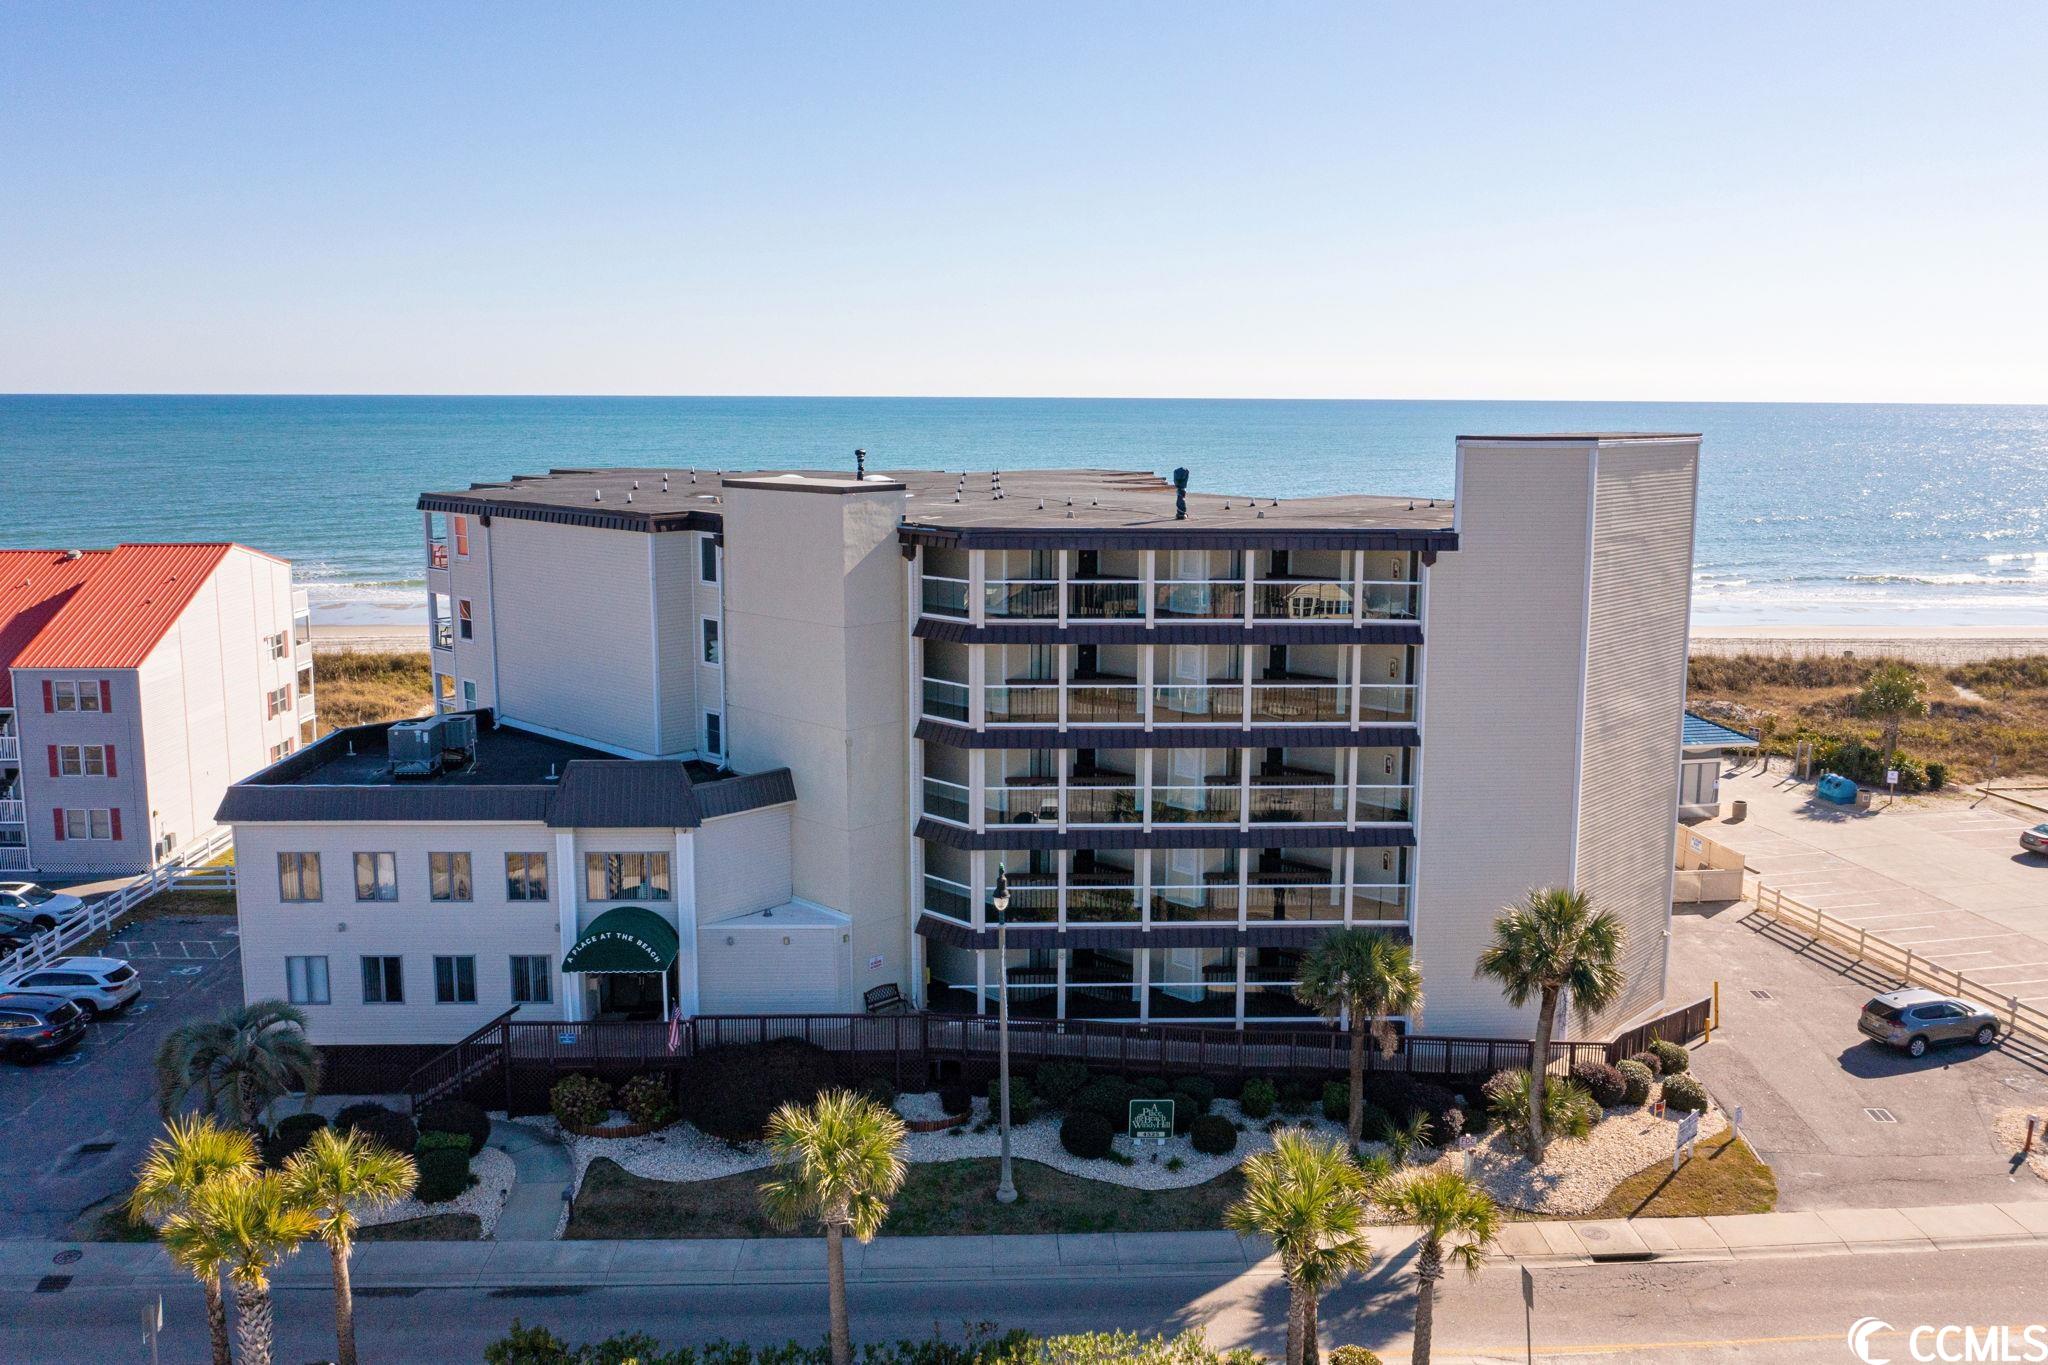 enjoy a relaxing vacation in this charming, ocean-front condo with a traditional beach feel. a semi-private balcony off the dining/kitchen area overlooks an unobstructed and sweeping shoreline that stretches for miles down to myrtle beach. located in the laid-back windy hill section of north myrtle beach, a place at the beach features 2 elevators, an oceanfront pool, hot tub & spa, and a grilling/picnic area. the building's name says it all... this truly should be your place at the beach!